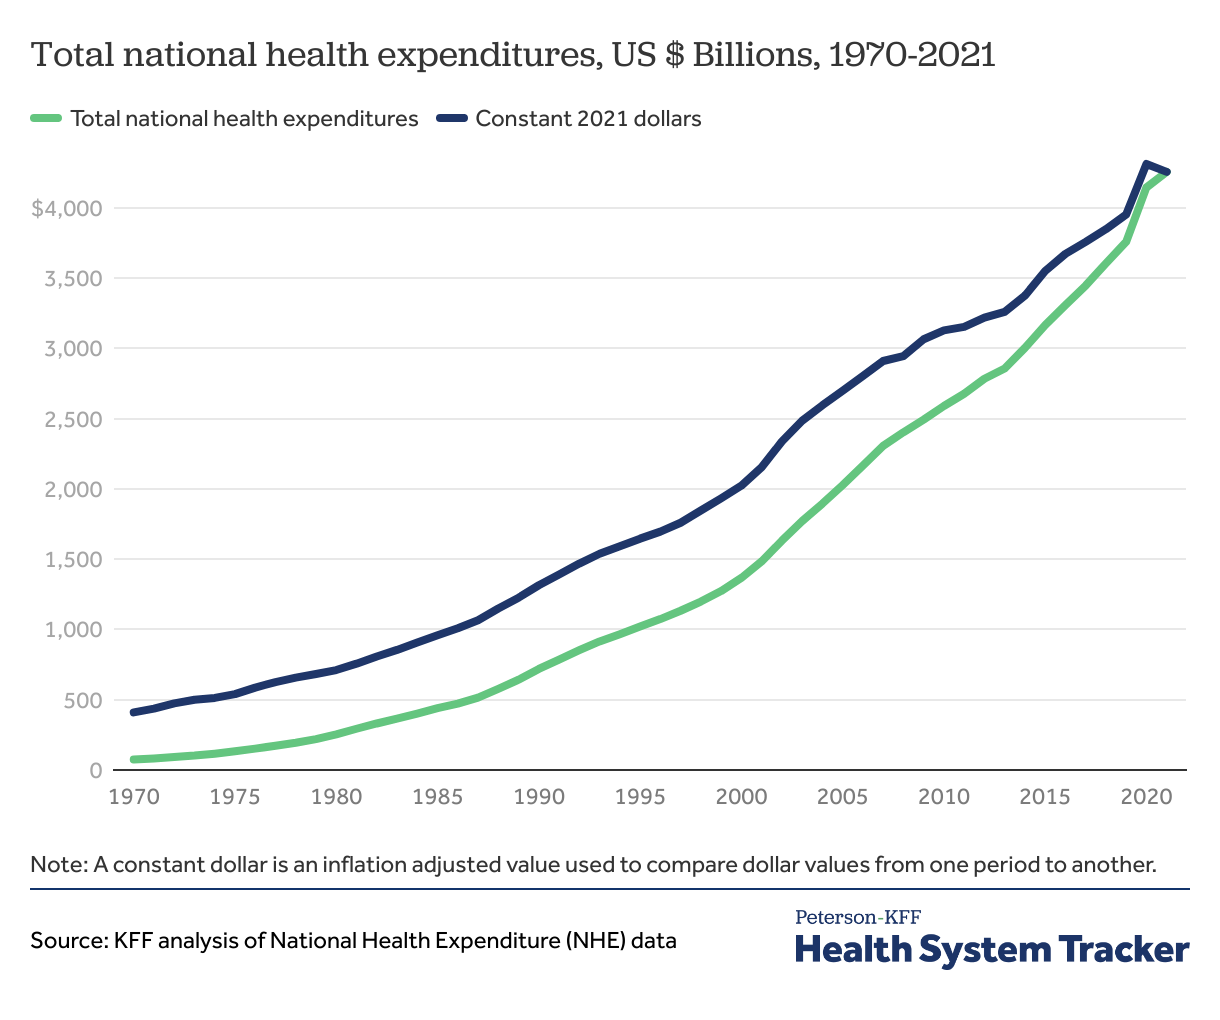 How has U.S. spending on healthcare changed over time? PetersonKFF